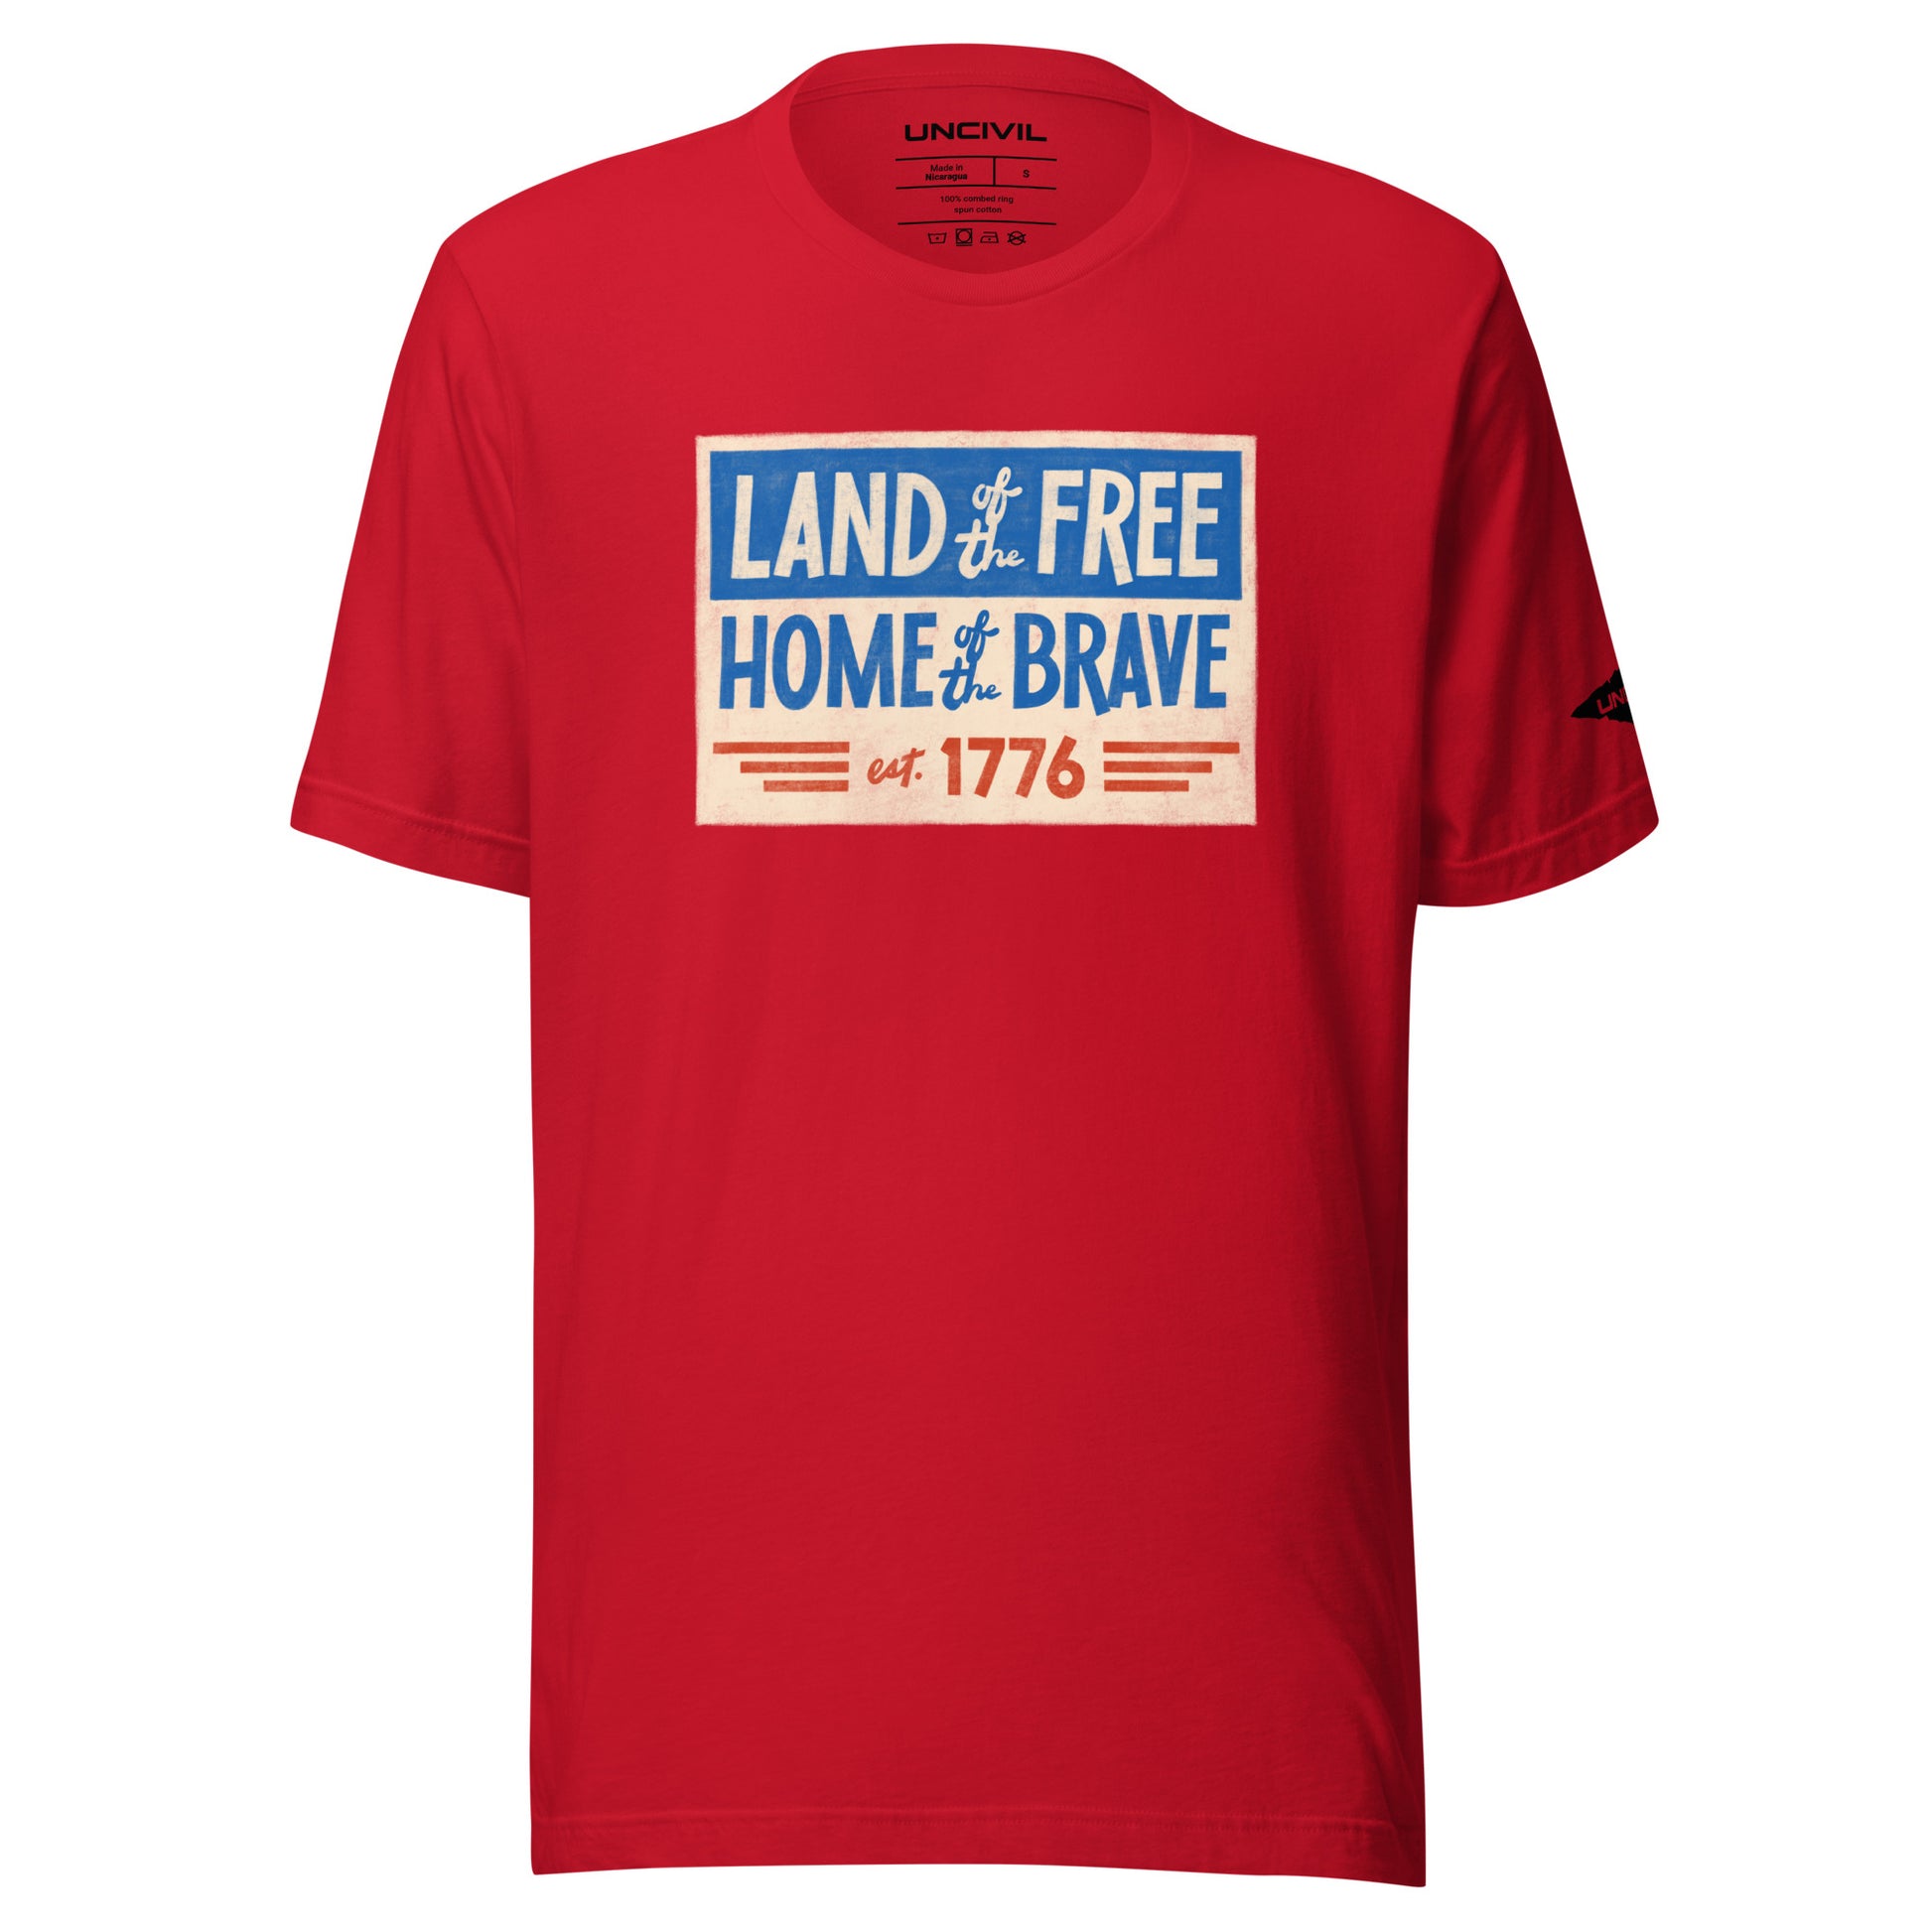 Land of the Free Home of the Brave t-shirt, red unisex patriotic shirt.